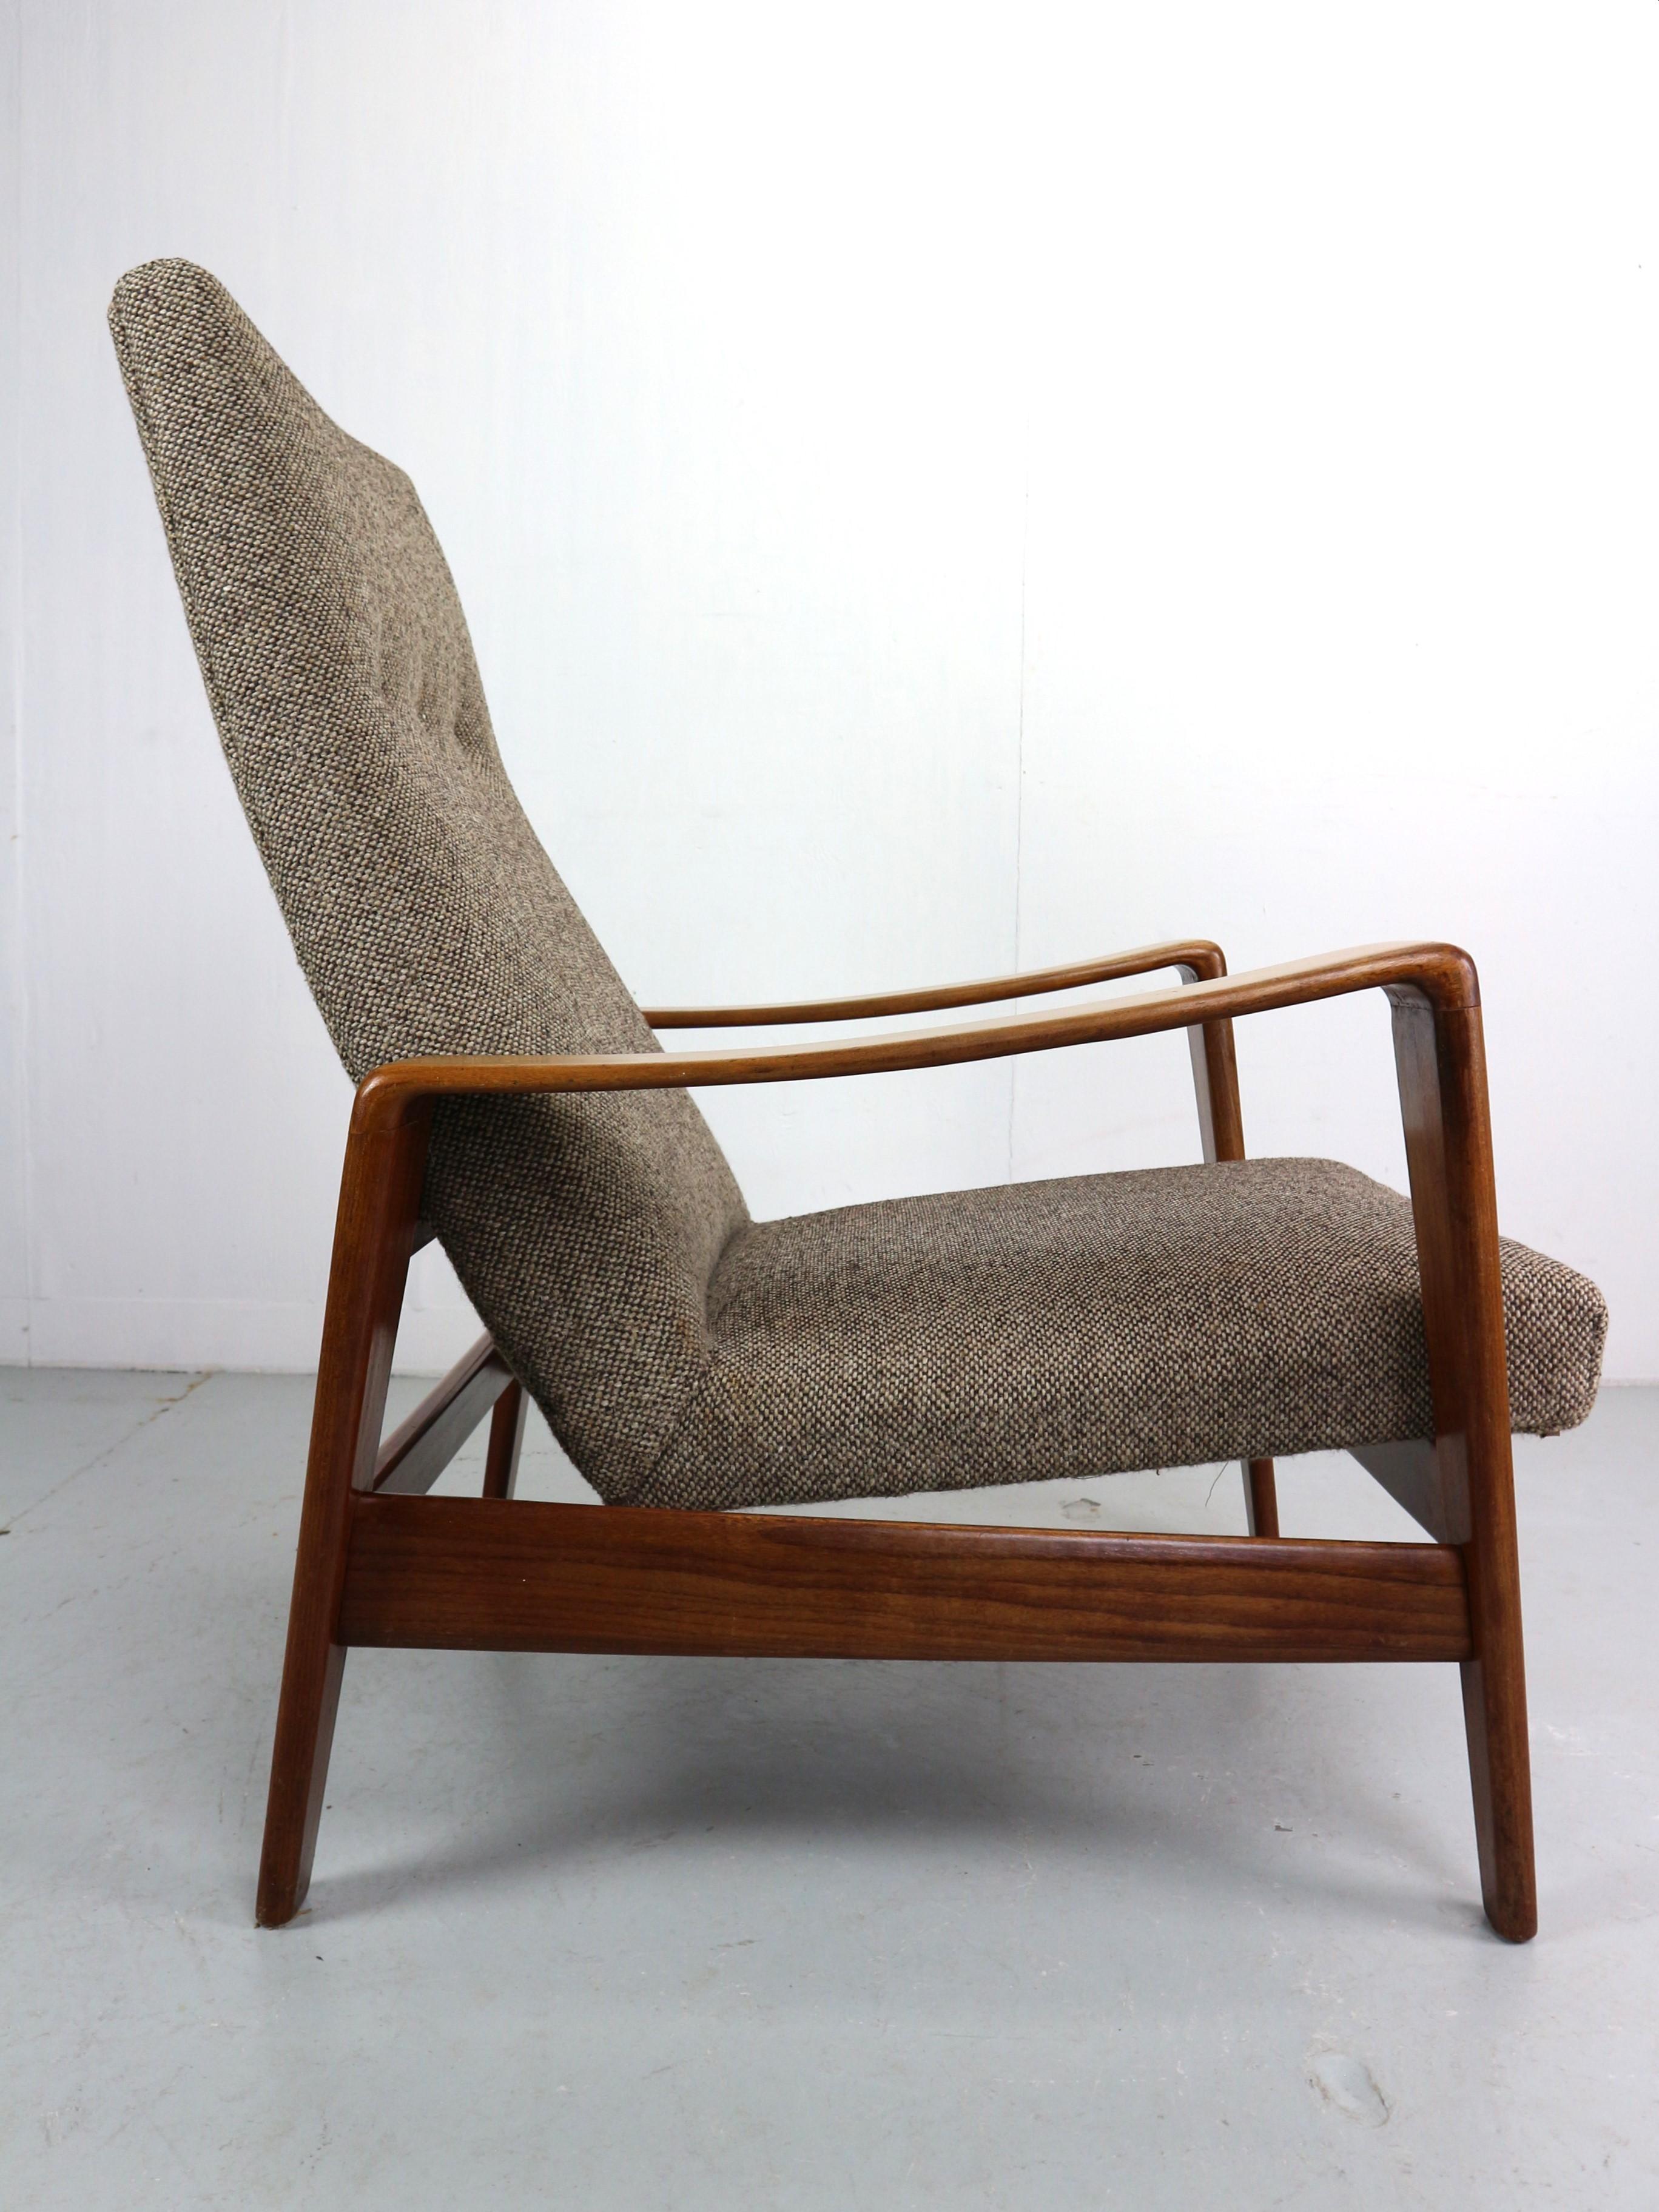 Danish Lounge Chair by Arne Wahl Iversen for Komfort, 1960s For Sale